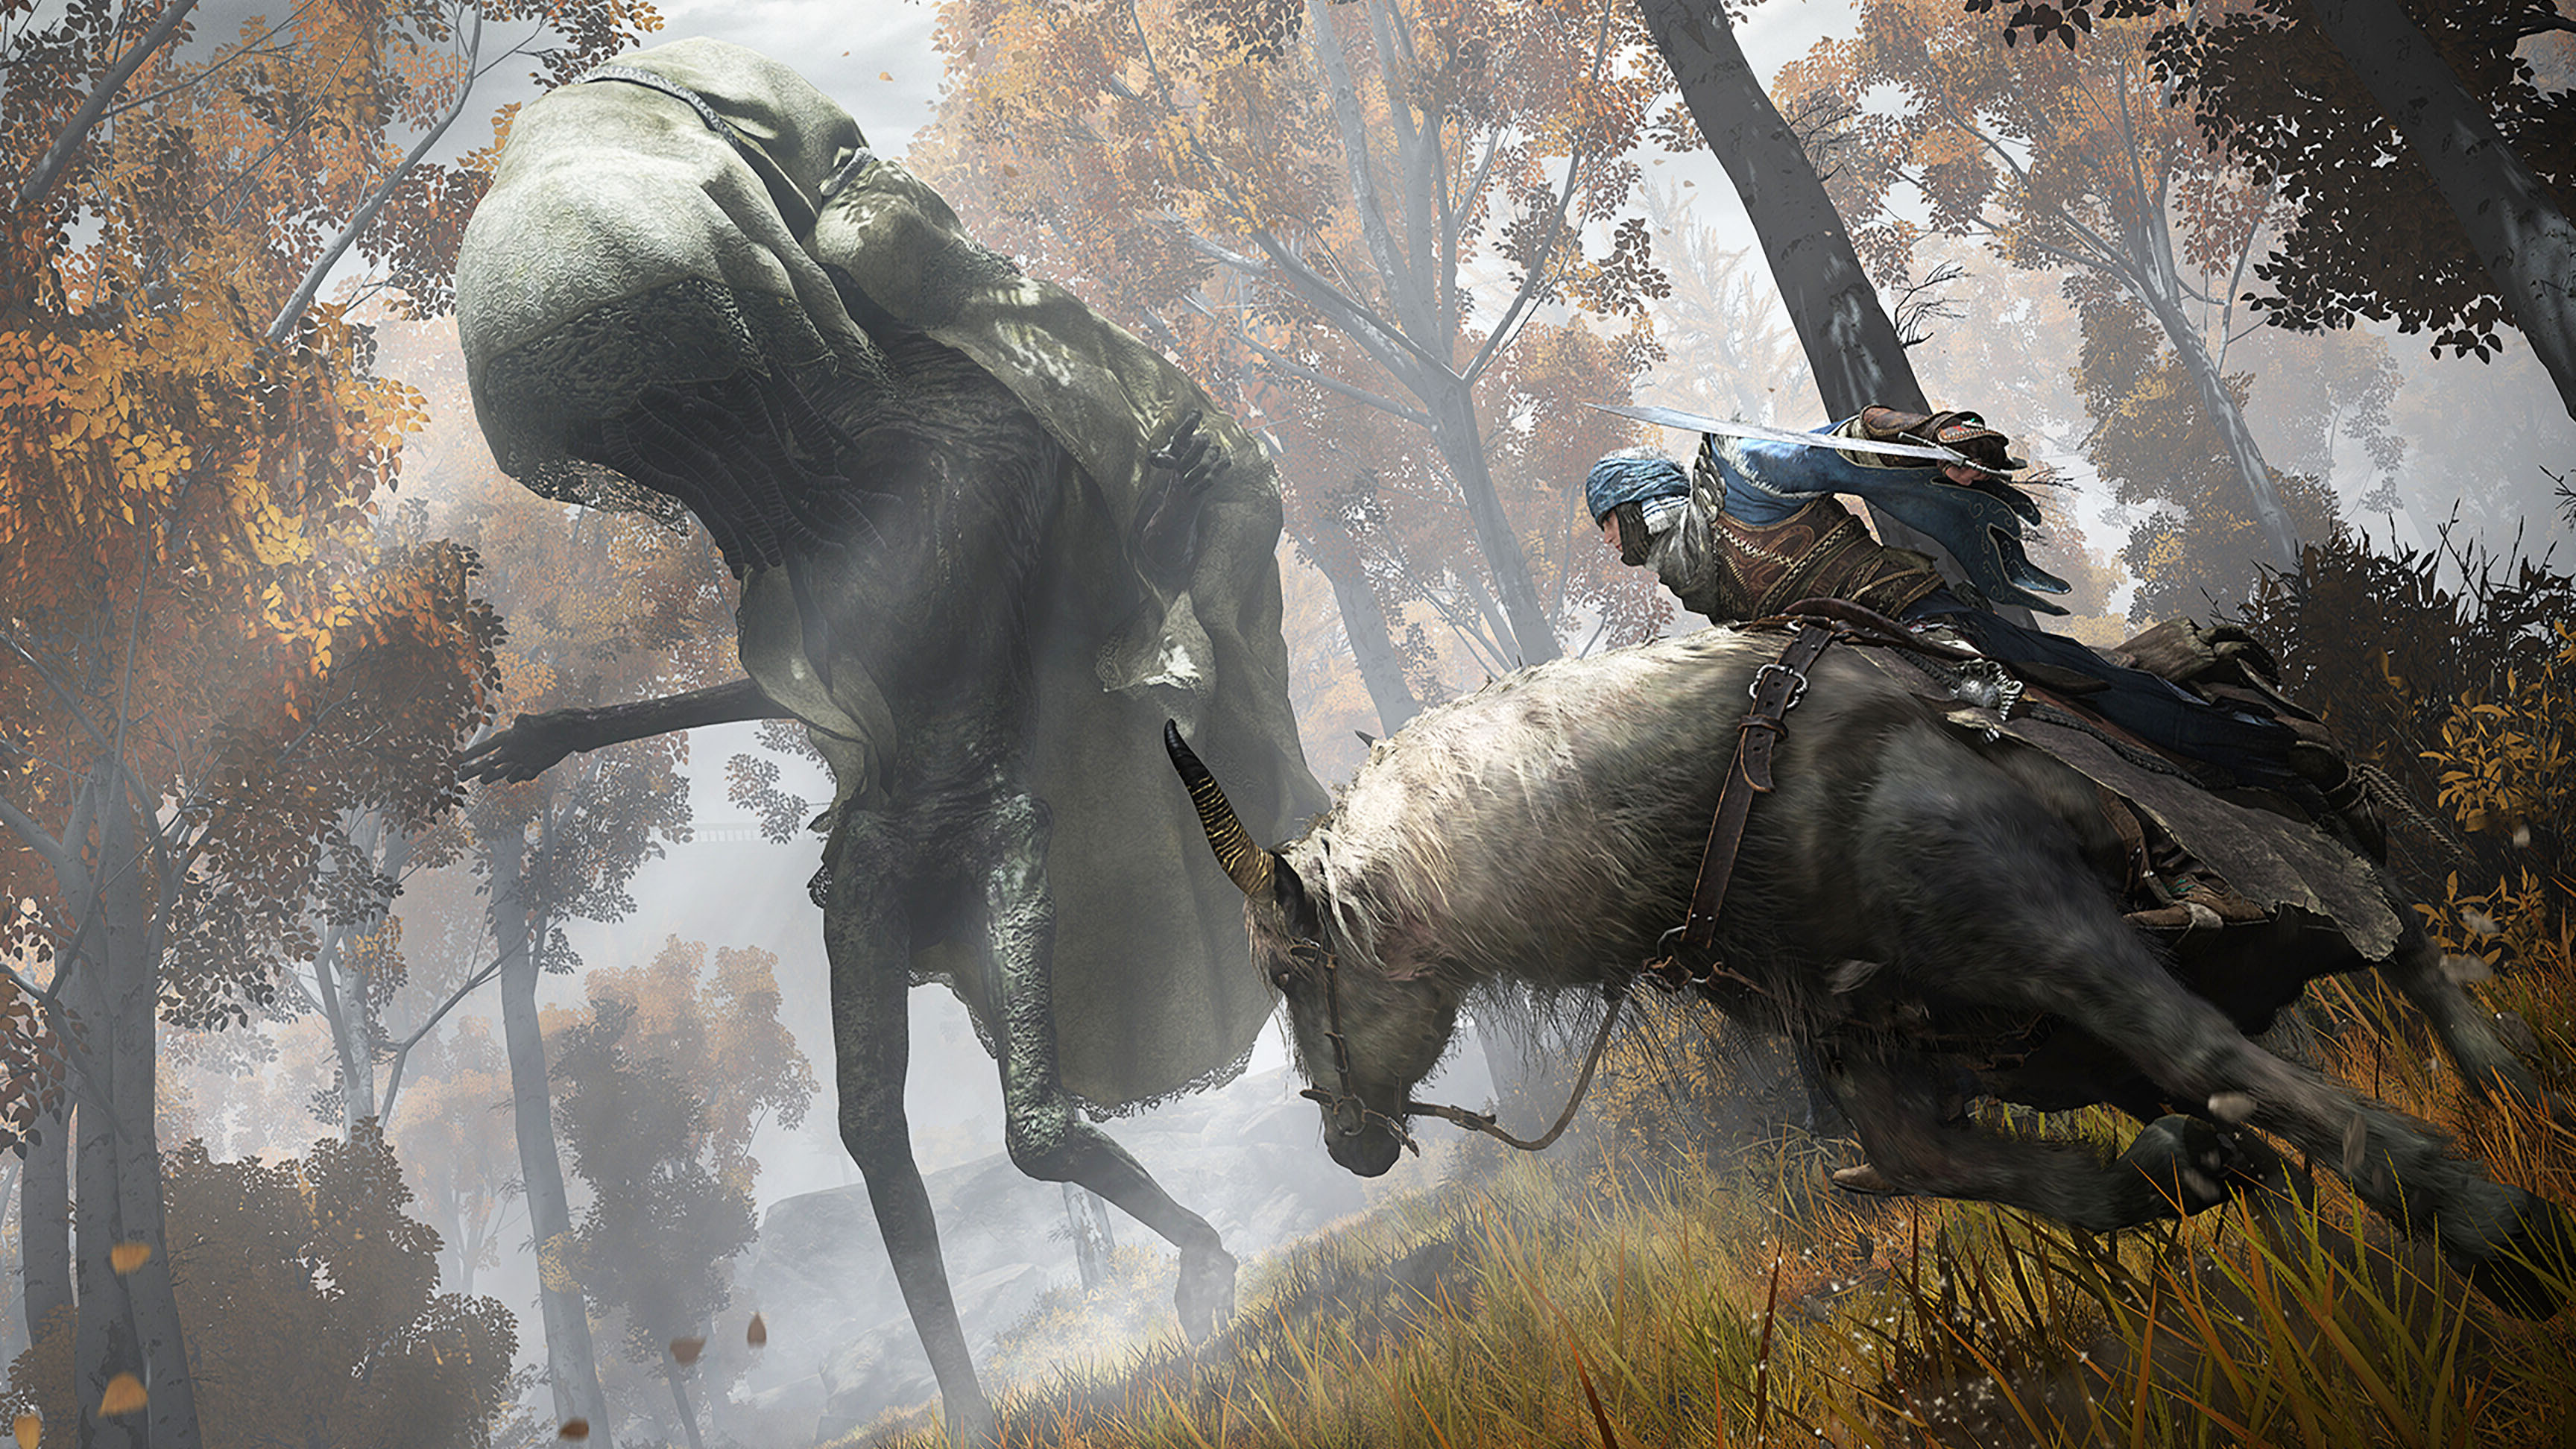 Elden Ring, a player on horseback being pursued by a tall humanoid creature covered in cloth.